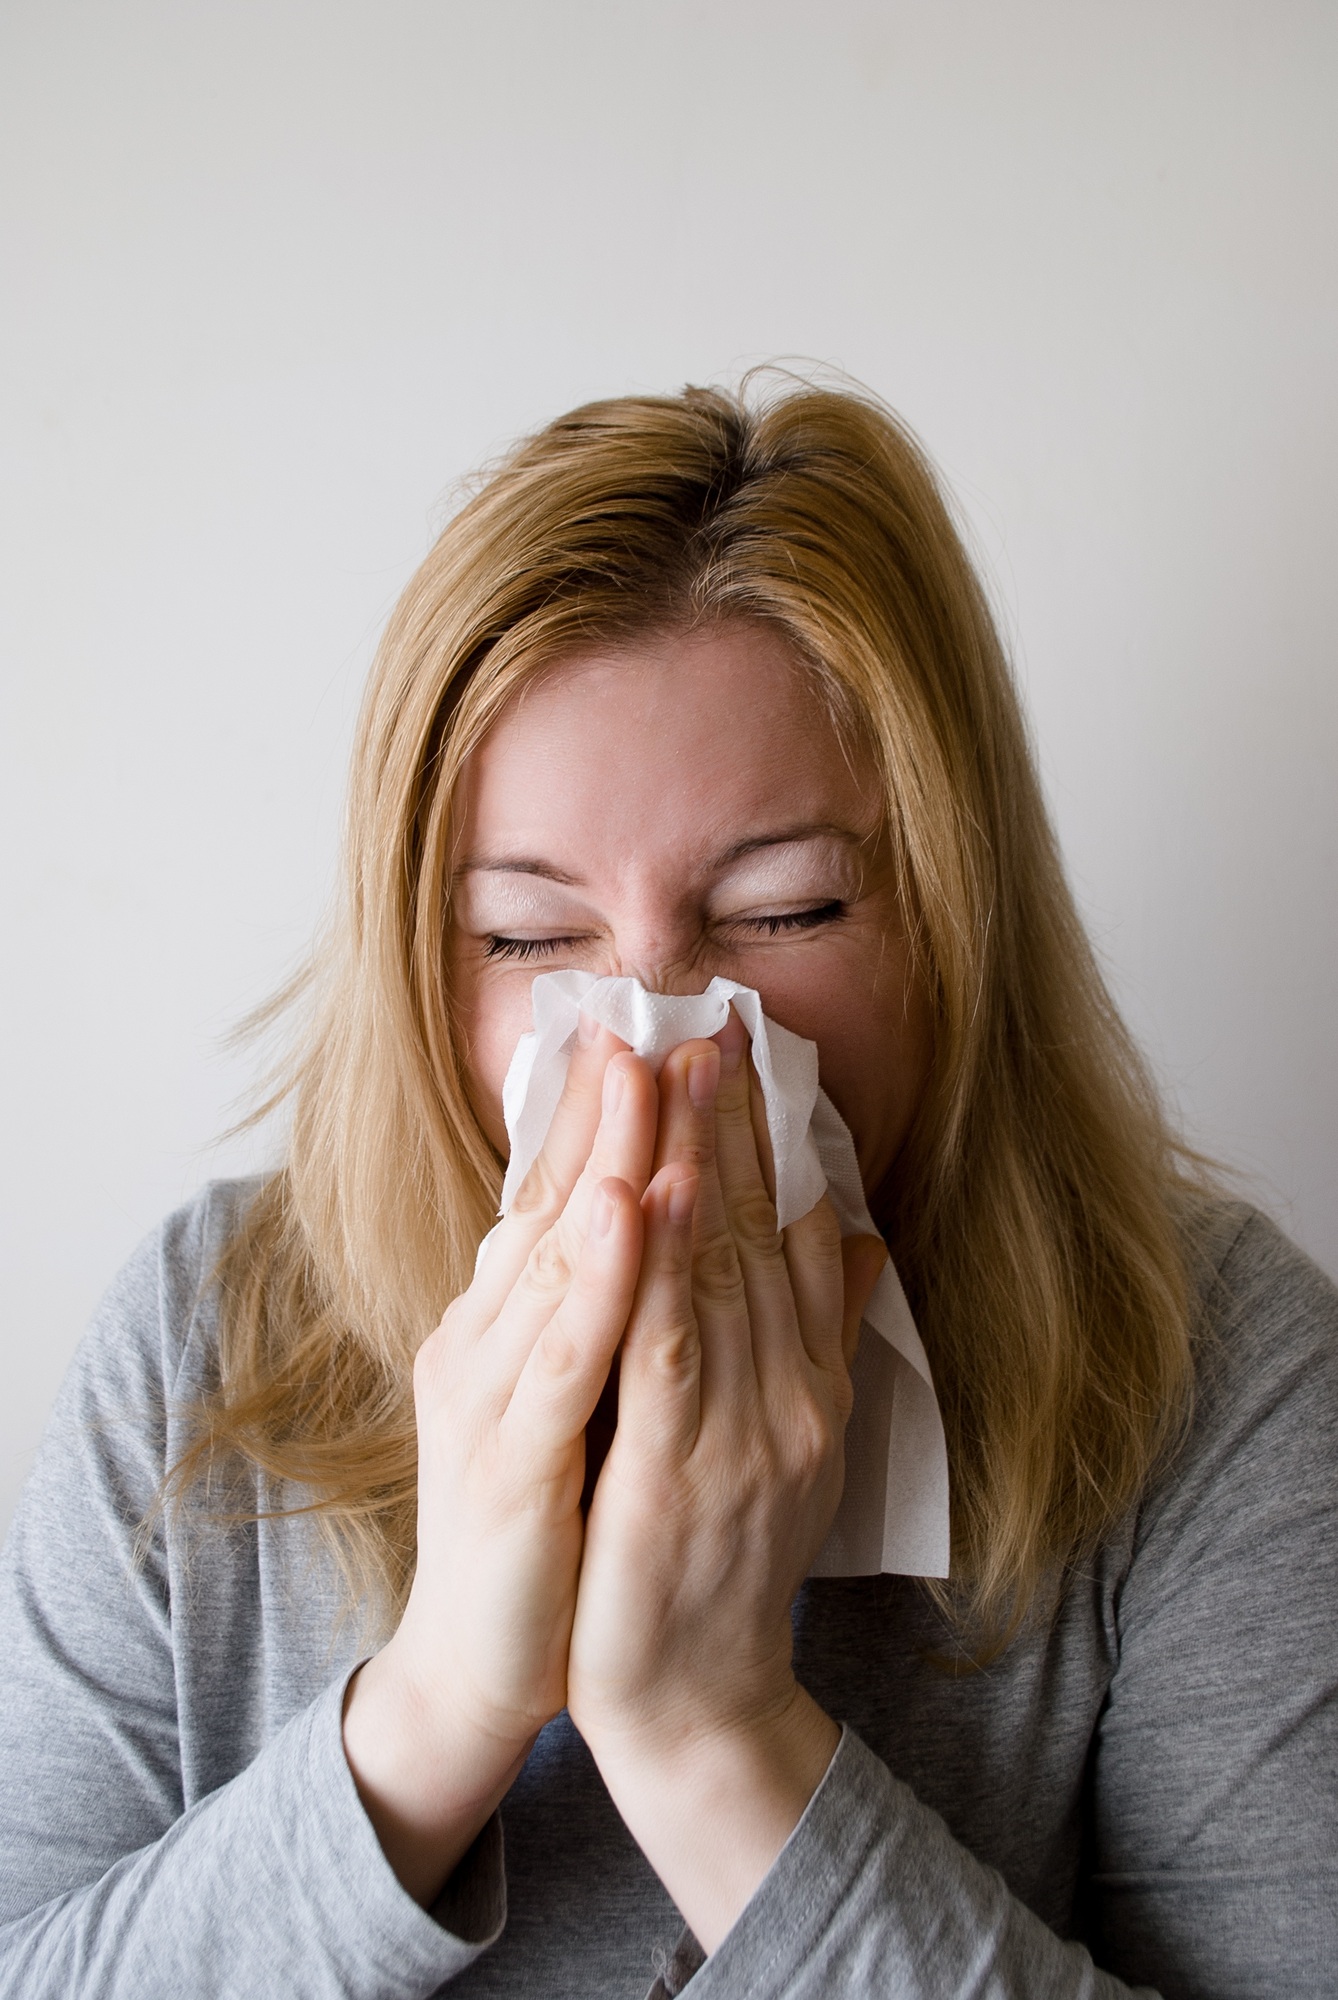 5 Simple Ways to Relieve Indoor Allergies57f88335dfb3a7348043b841286b3d7c